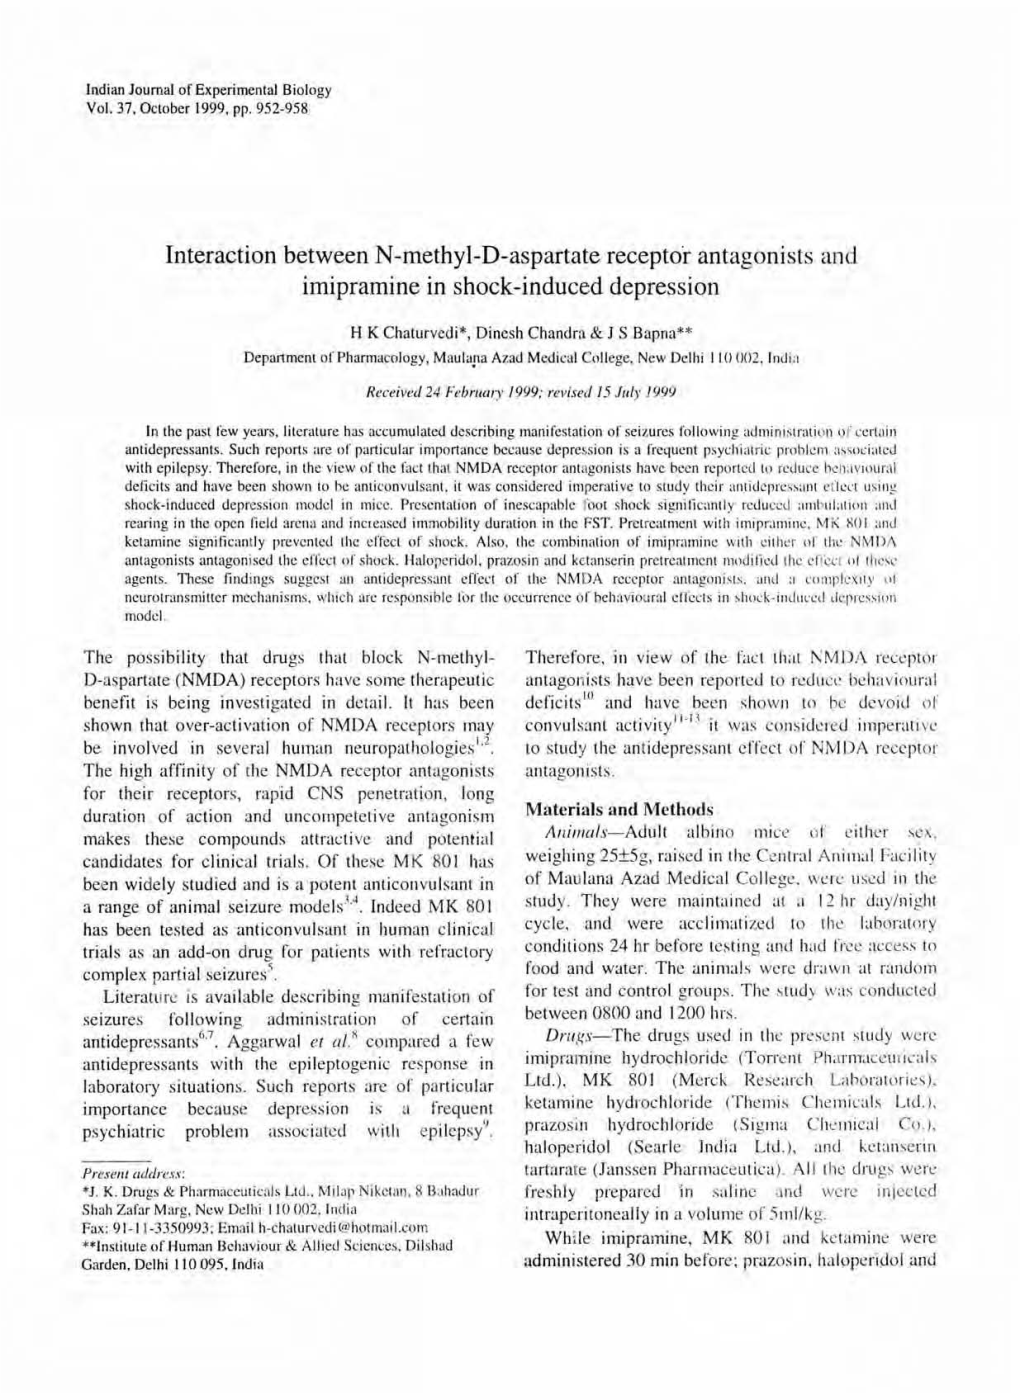 Interaction Between N-Methyl-D-Aspartate Recepto'r Antagonists and Imipramine in Shock-Induced Depression